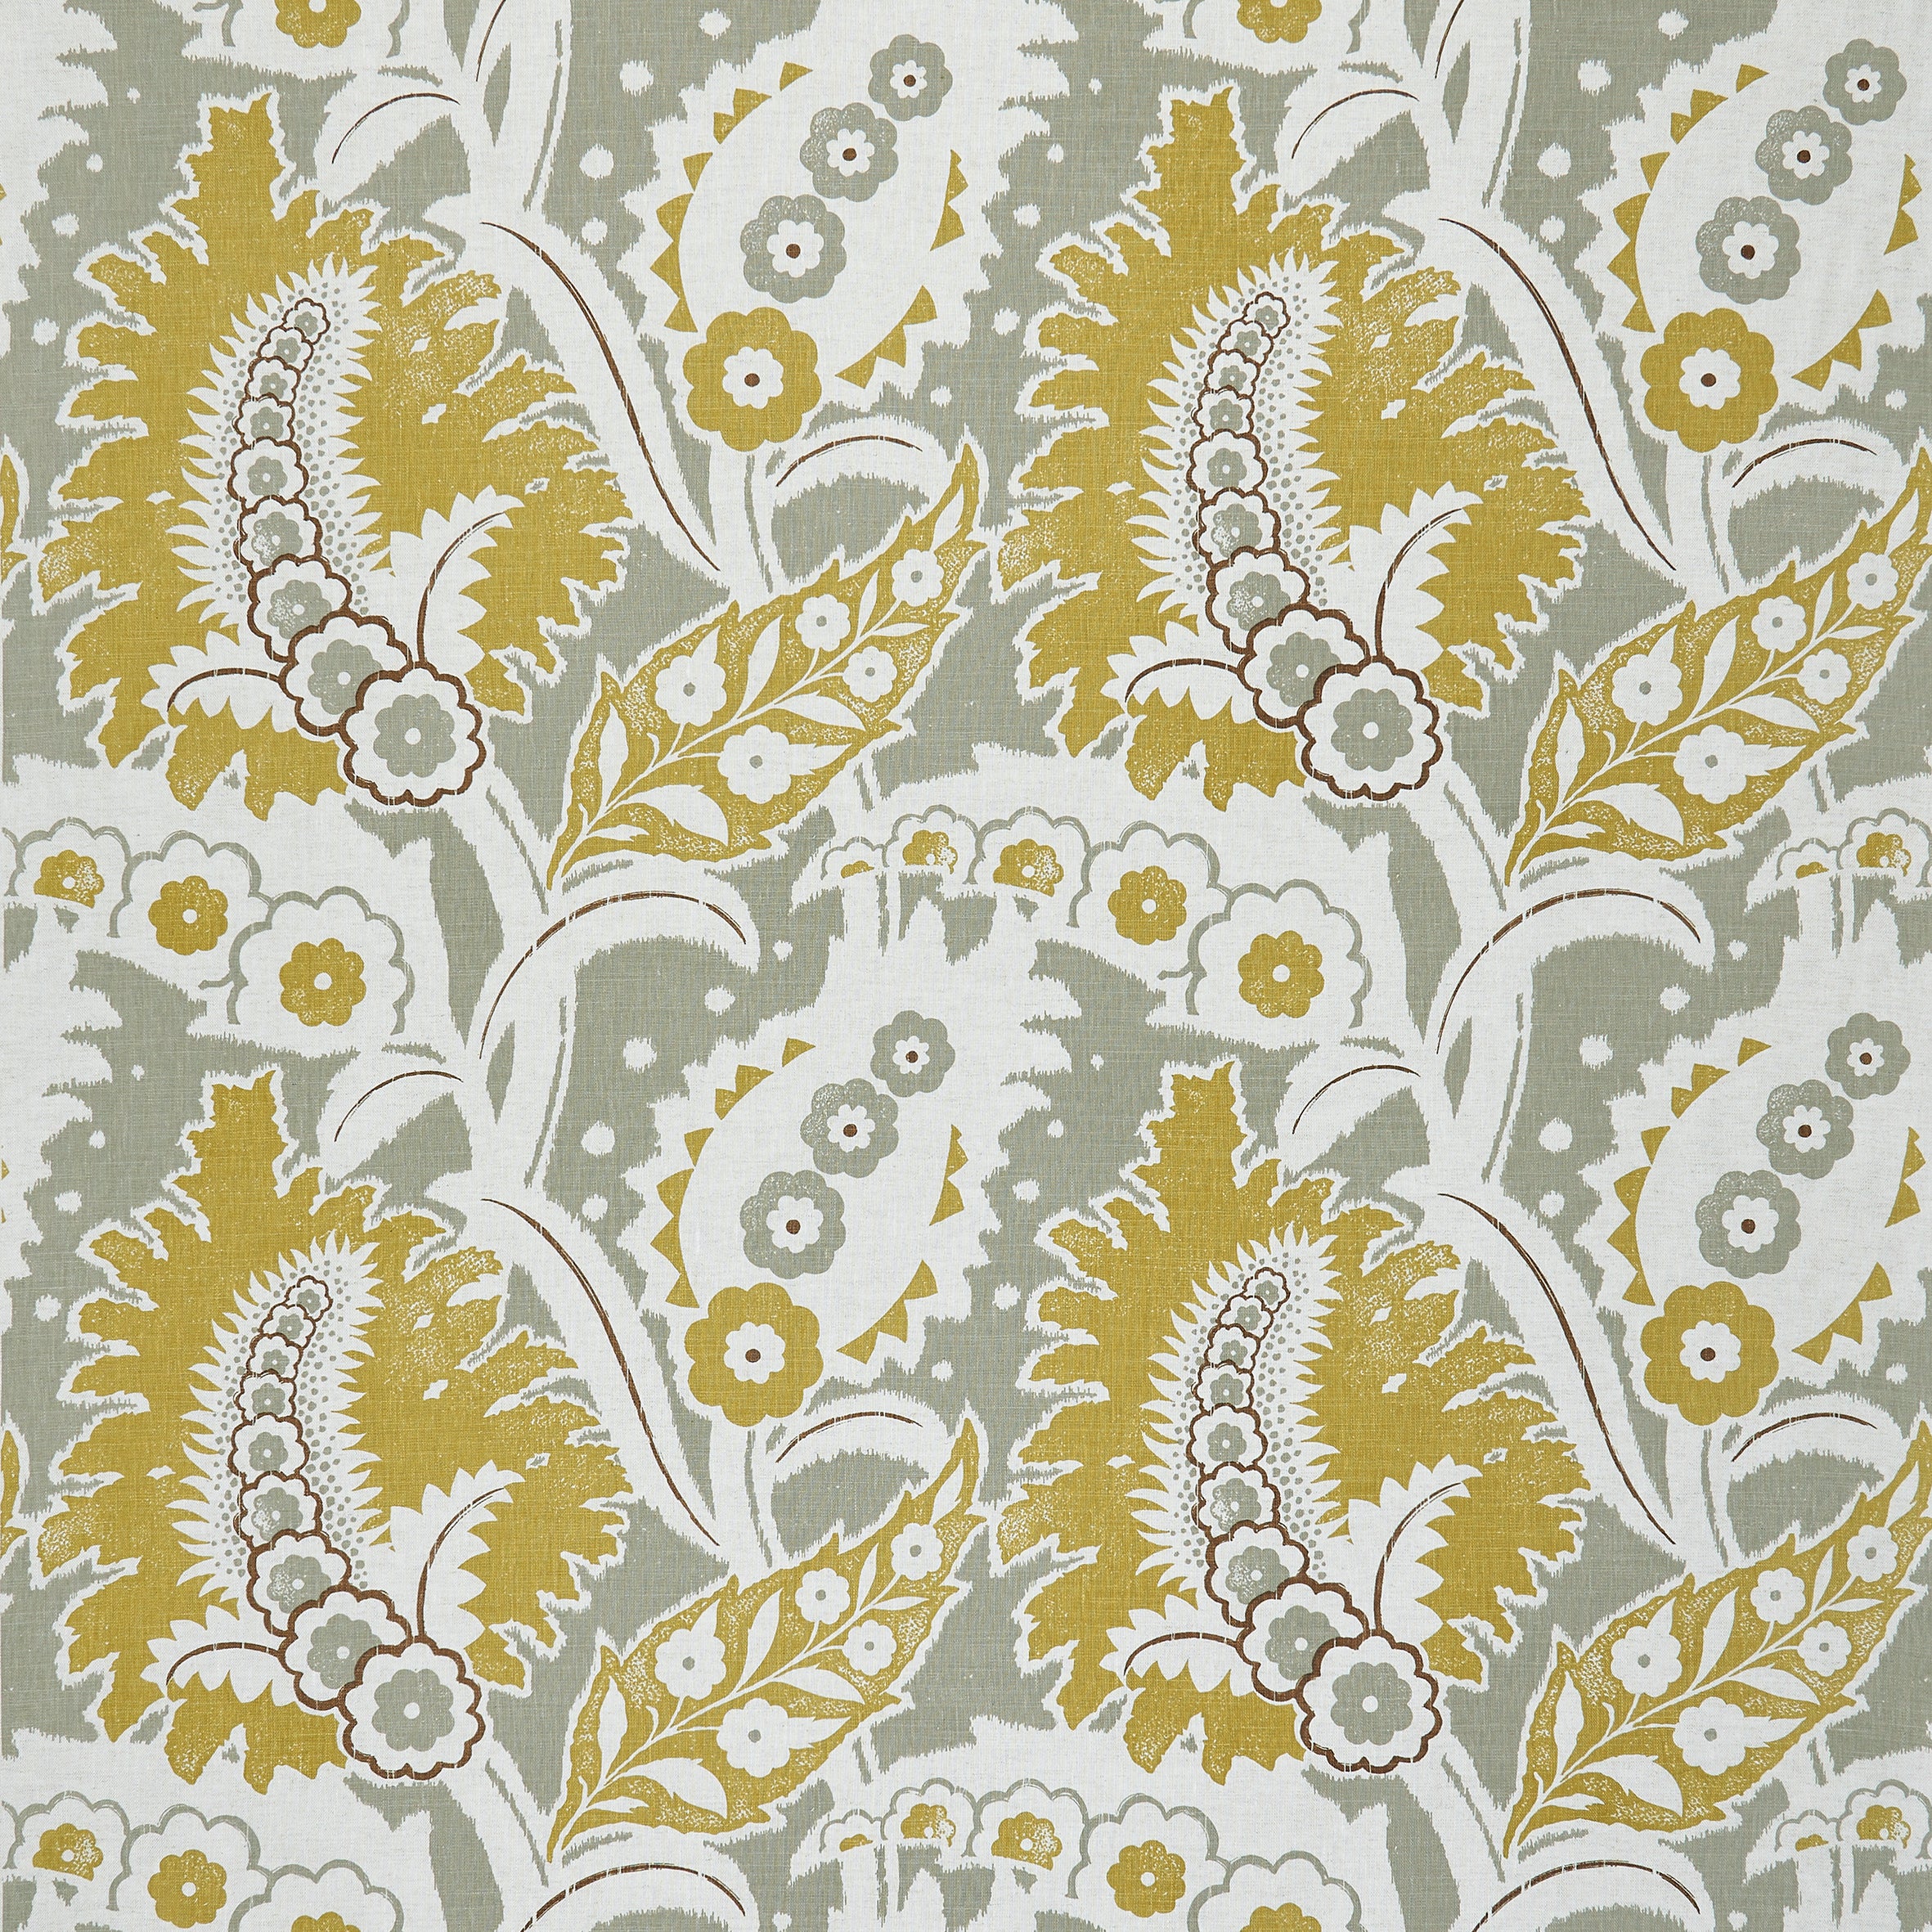 Detail of fabric in a botanical paisley print in shades of white, mustard and brown on a light gray field.